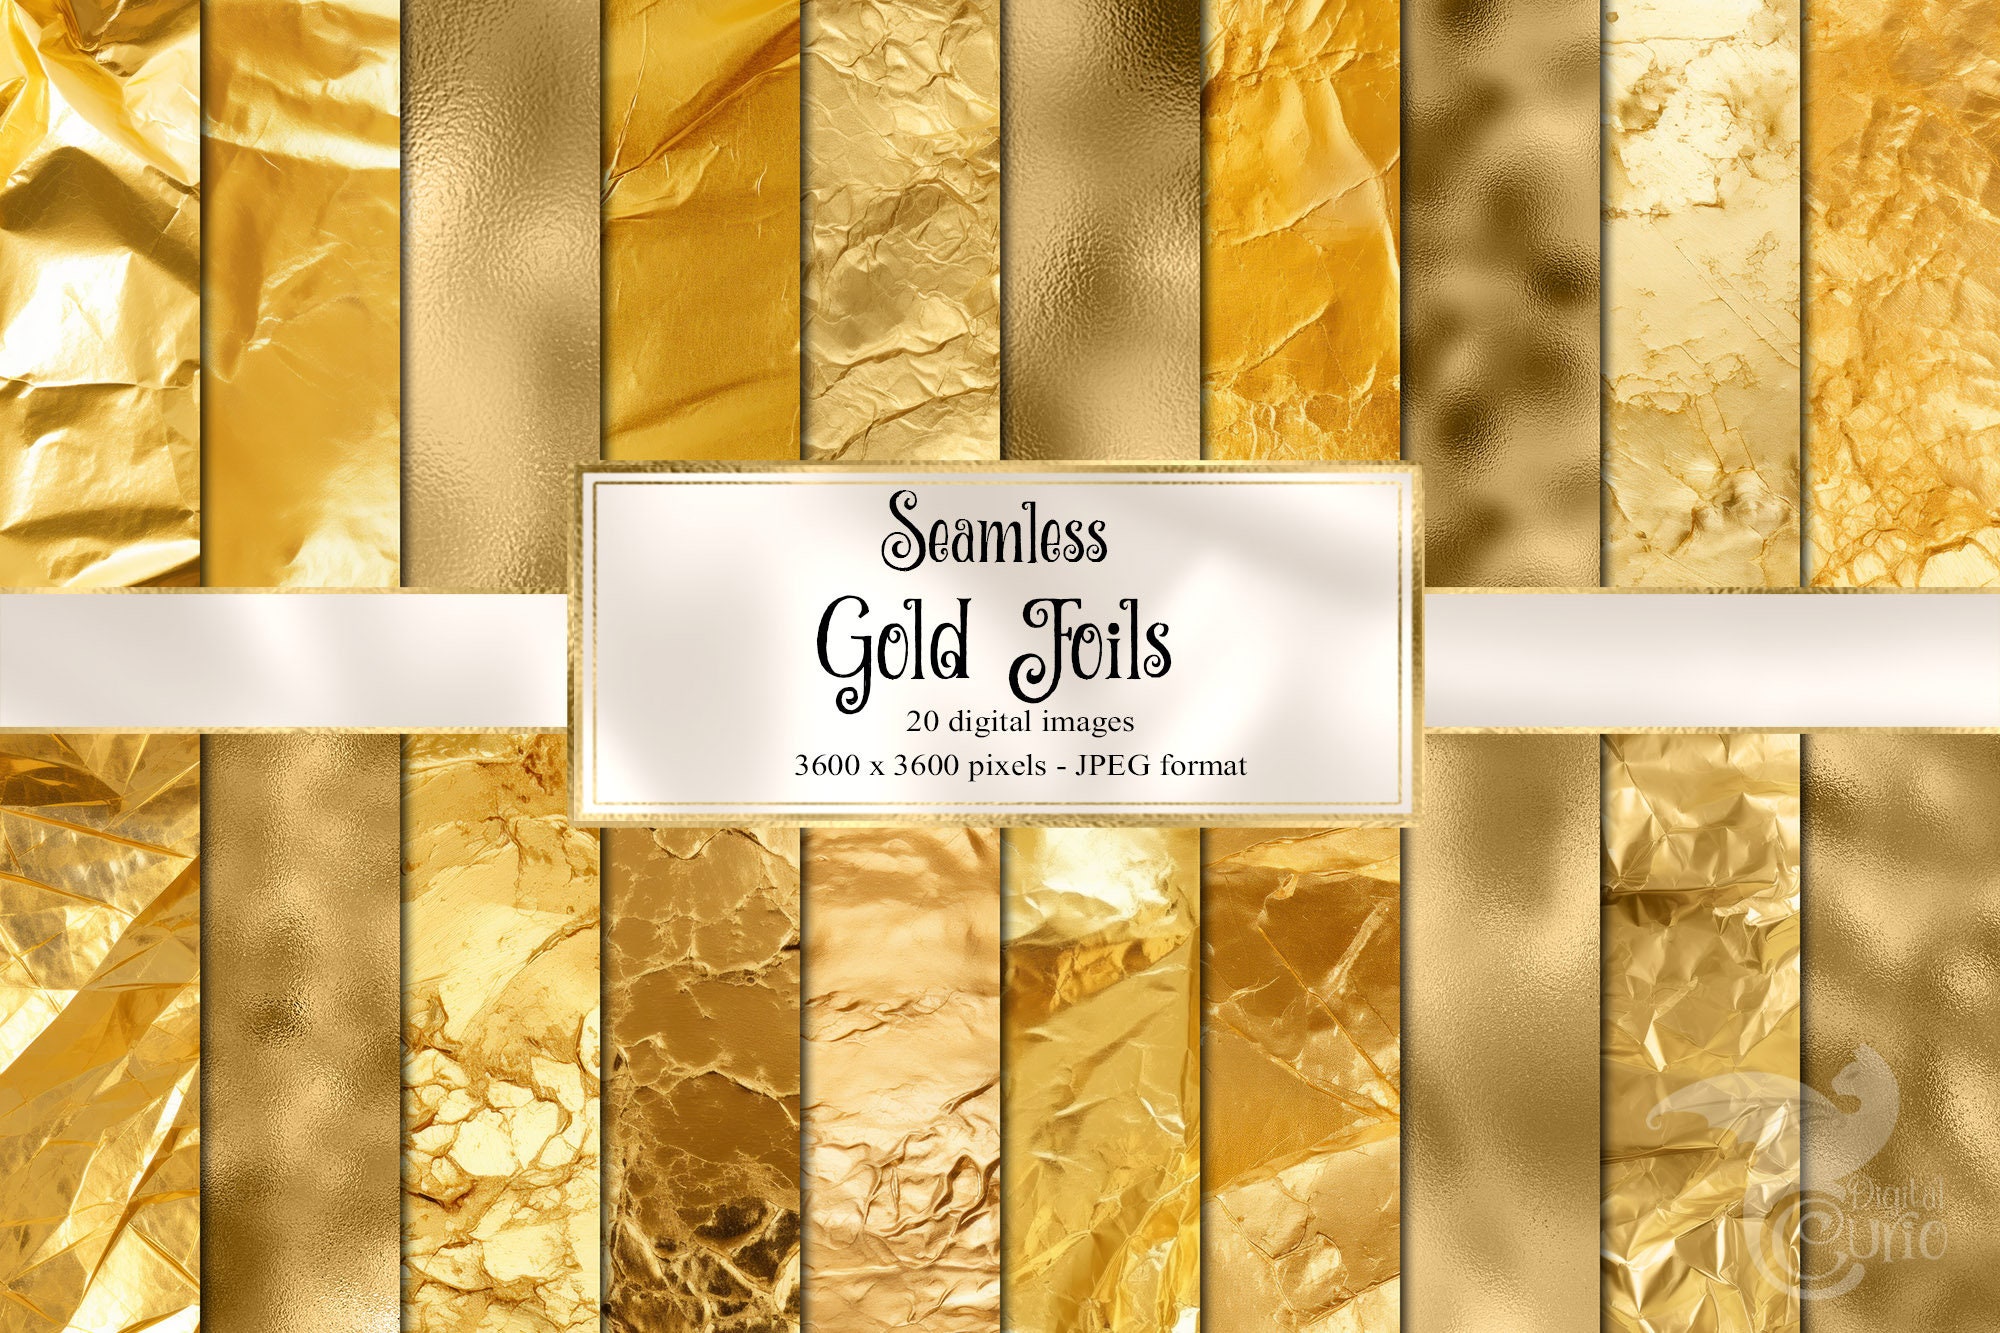 18 Metallic Gold Paint Overlays with transparent backgrounds